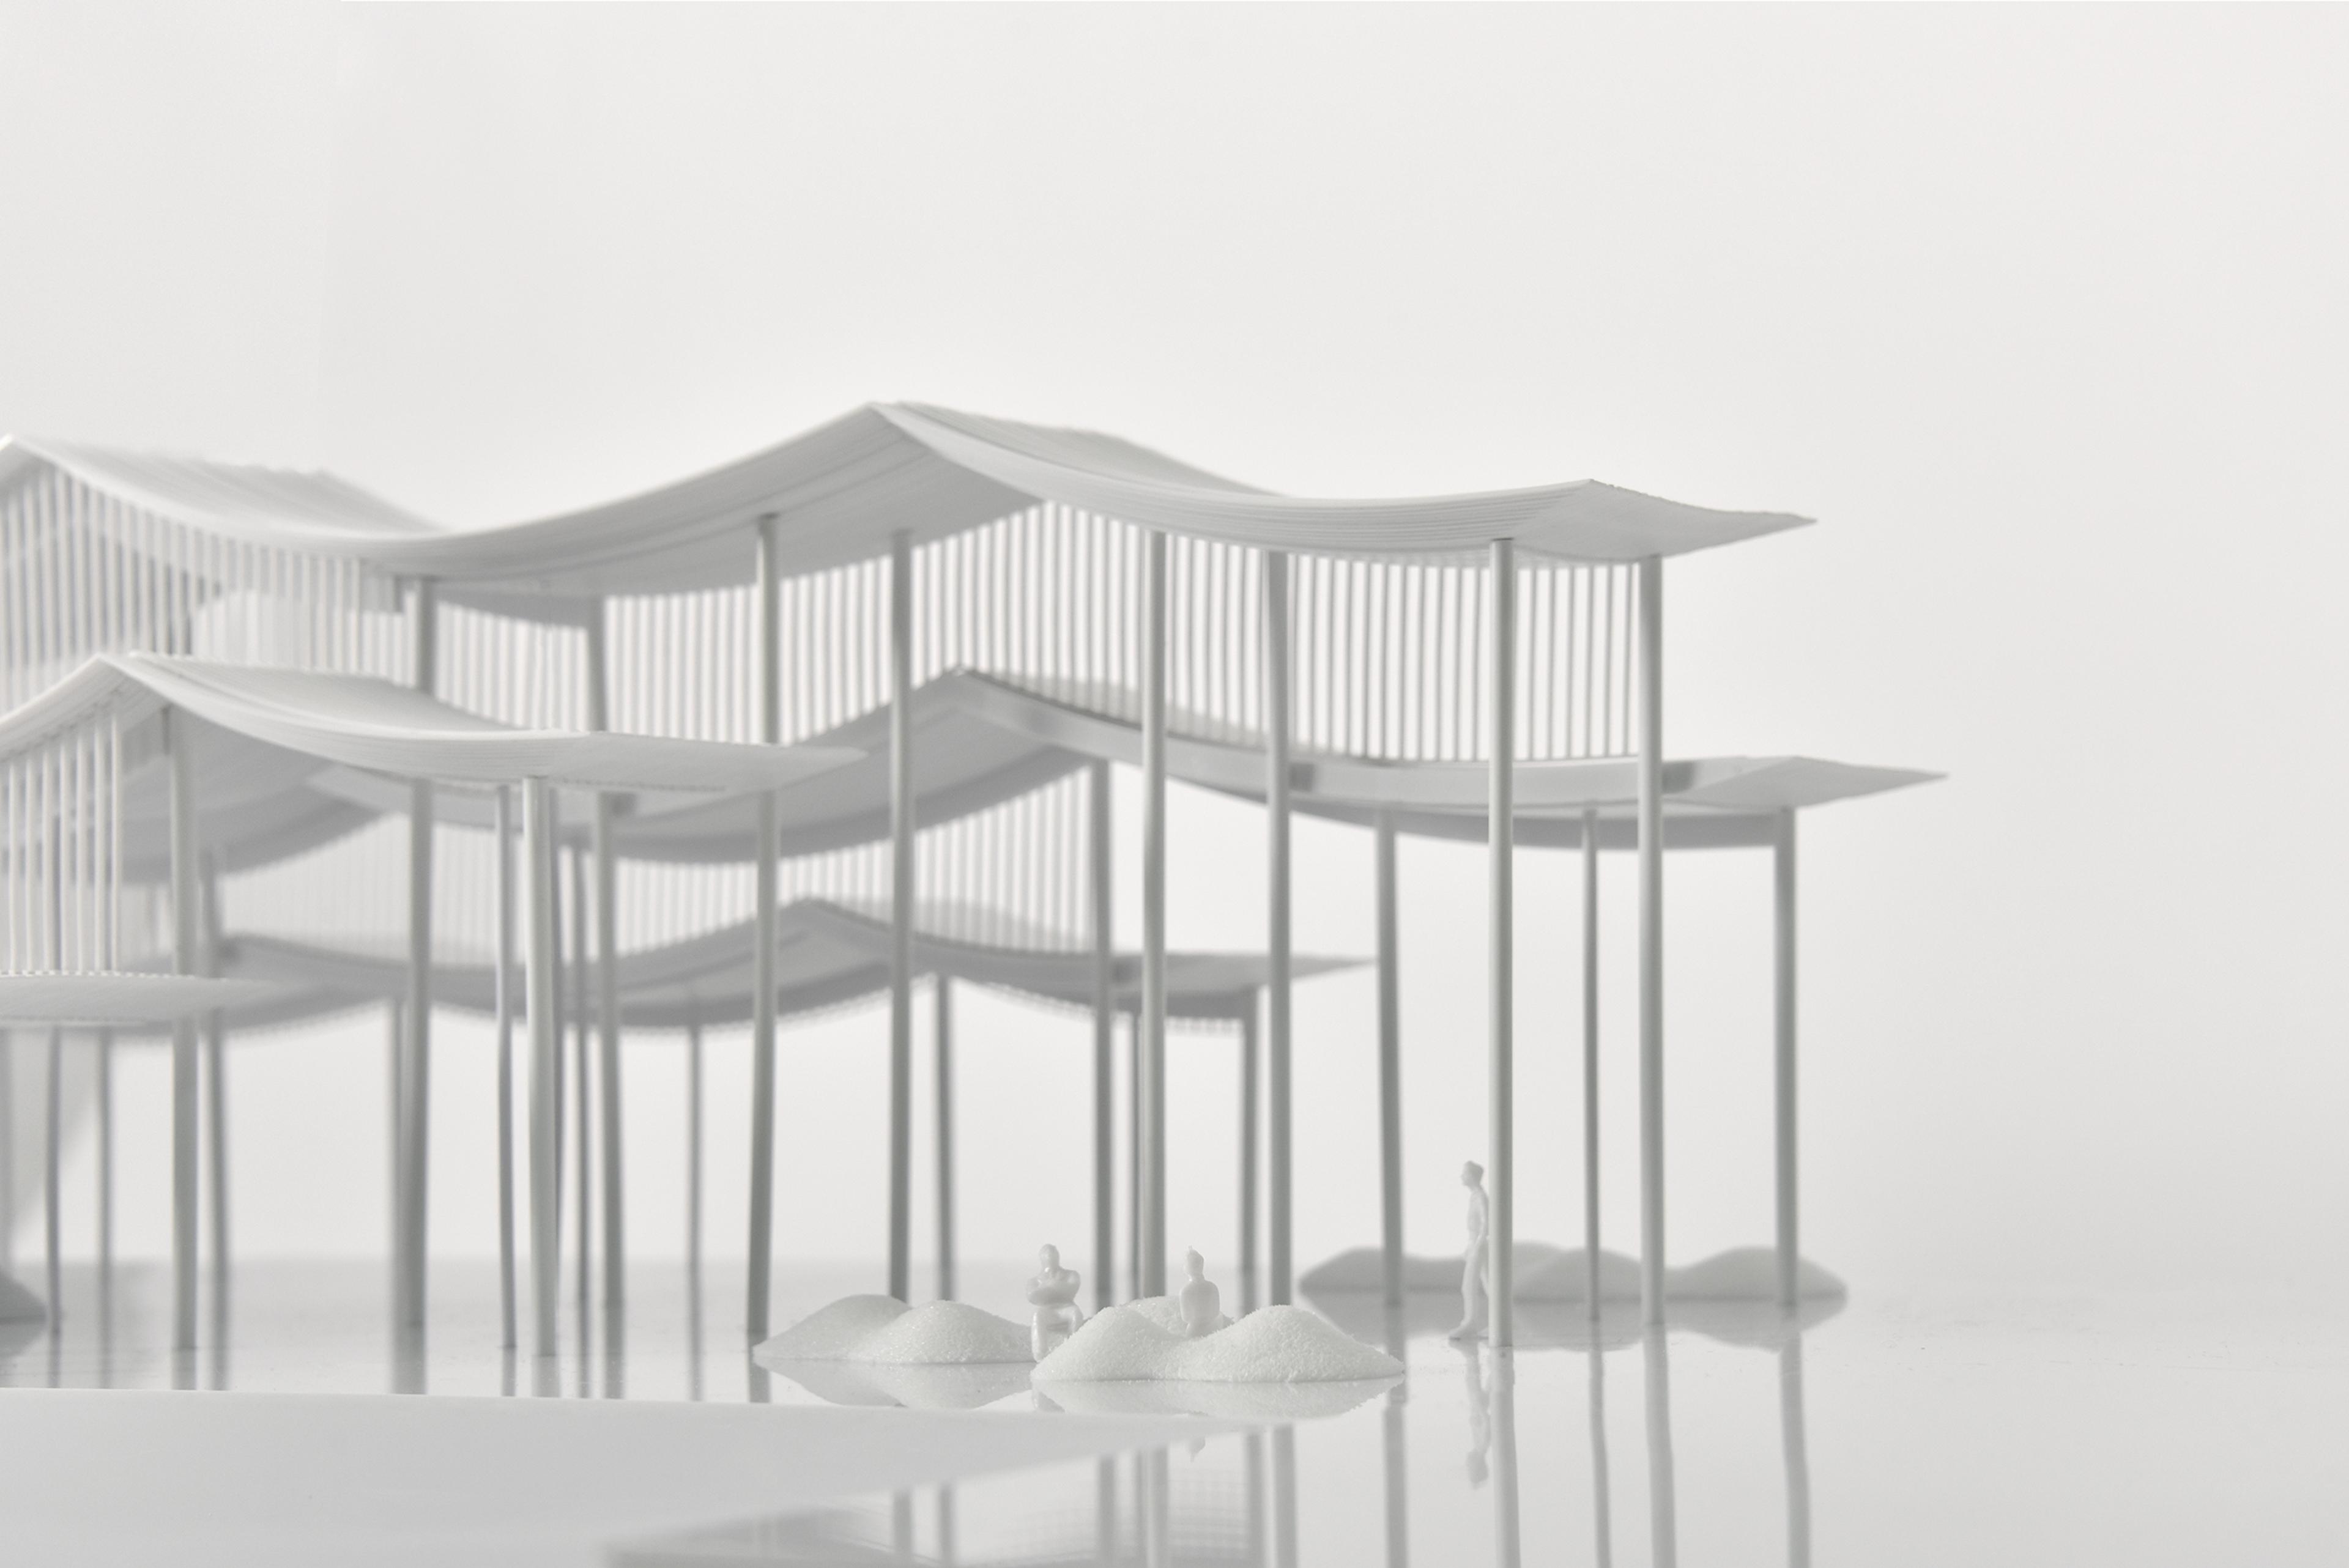 architectural model of pier with undulating canopy